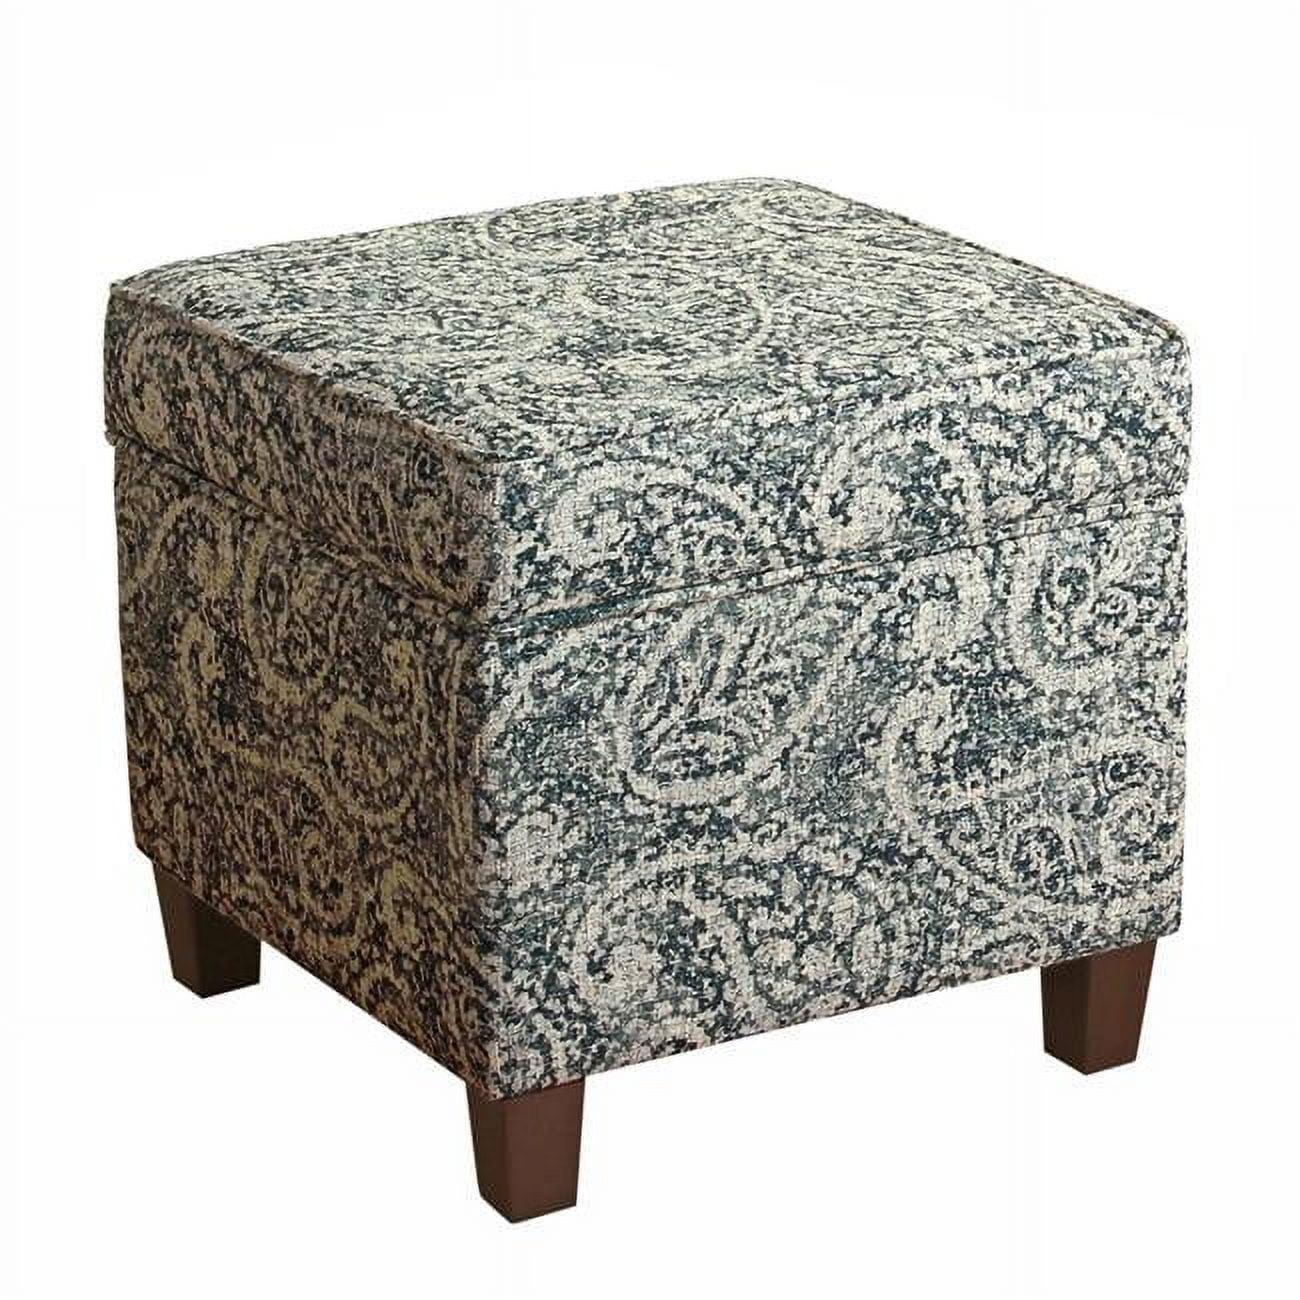 Paisley Blue and Gray Fabric Upholstered Storage Ottoman